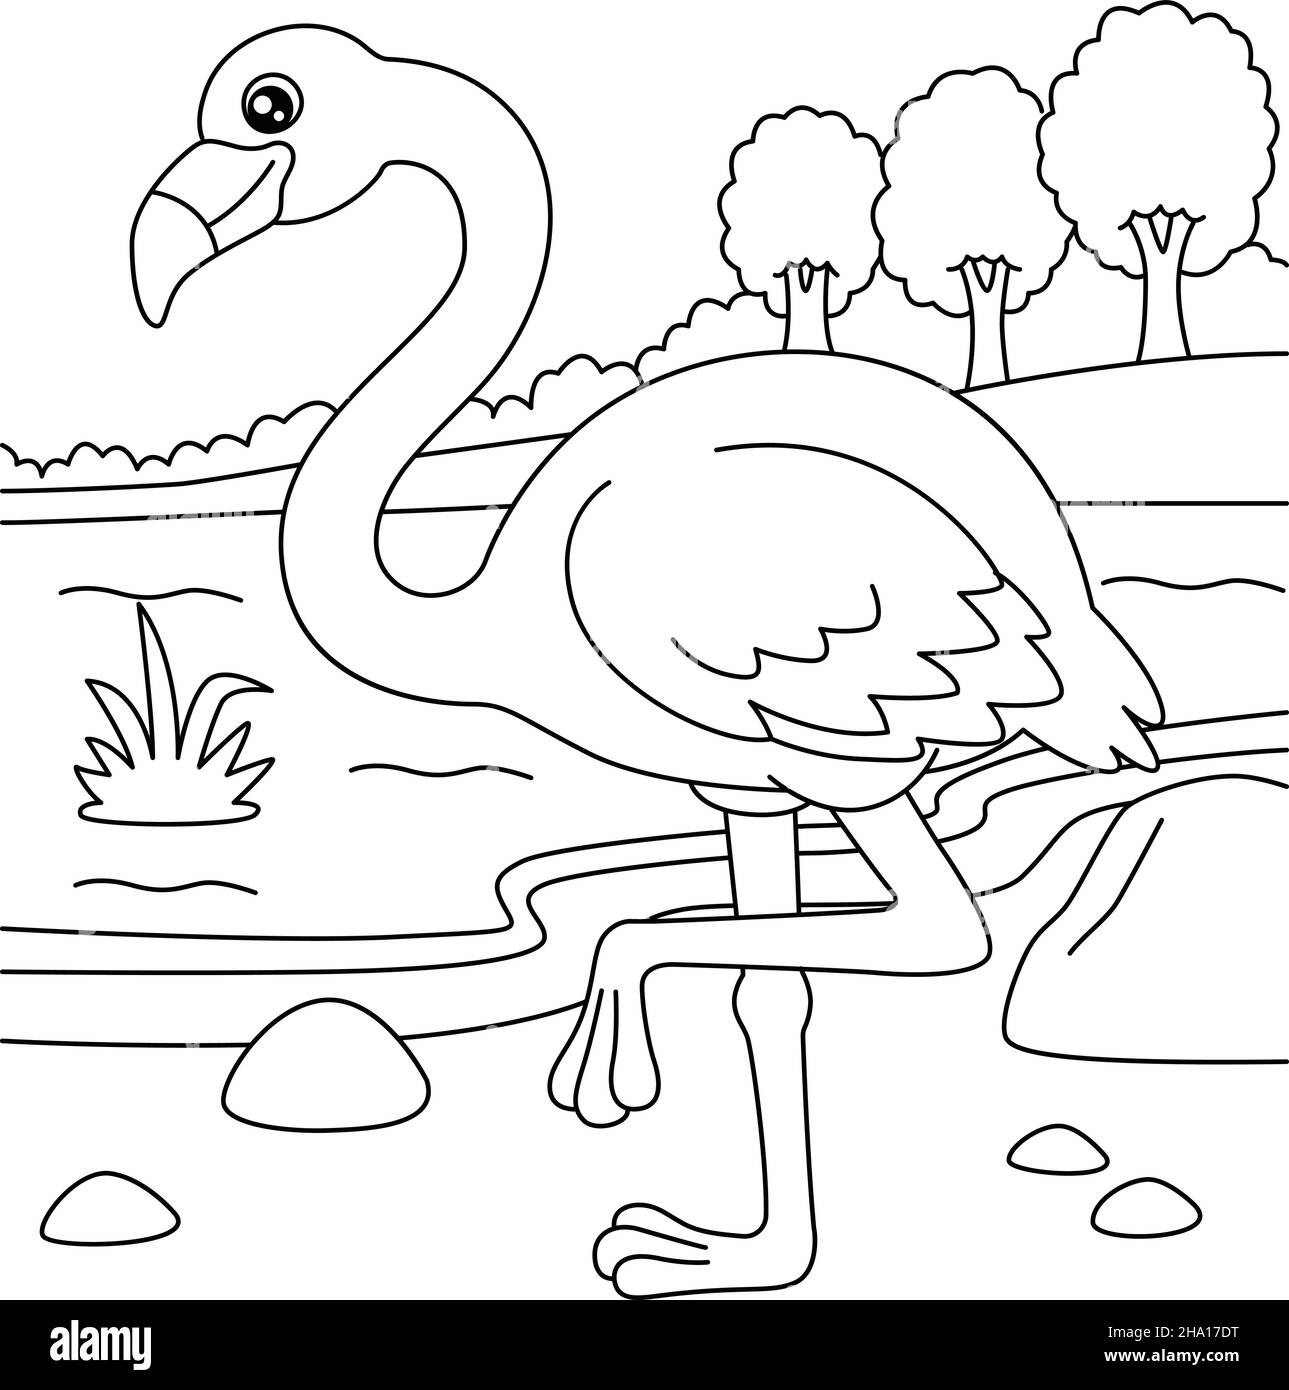 Flamingo coloring page for kids stock vector image art